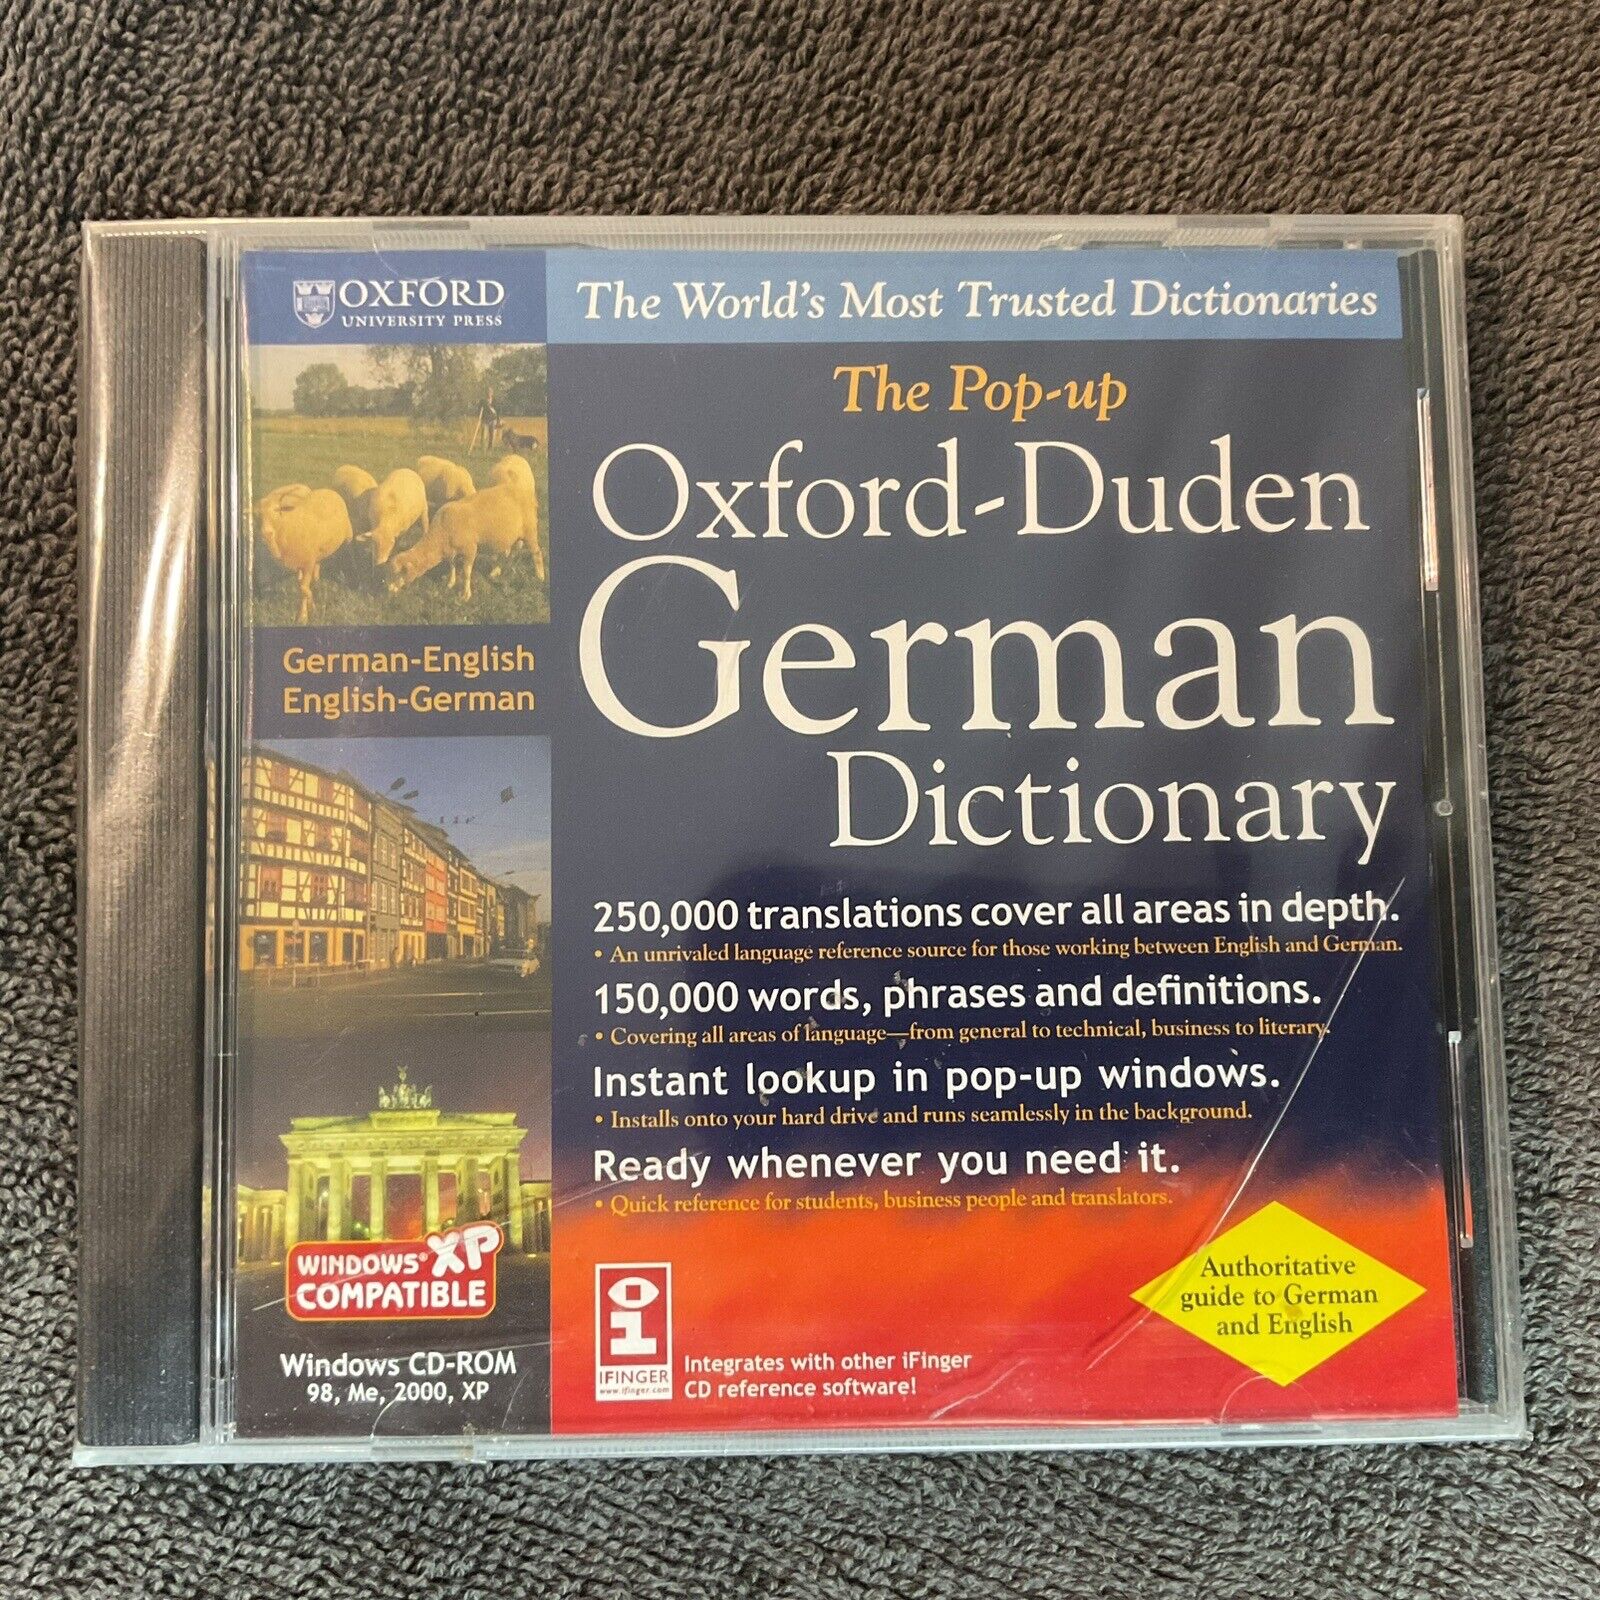 The Pop-up Oxford-Duden German Dictionary PC (CD 2005) Windows 2000, XP